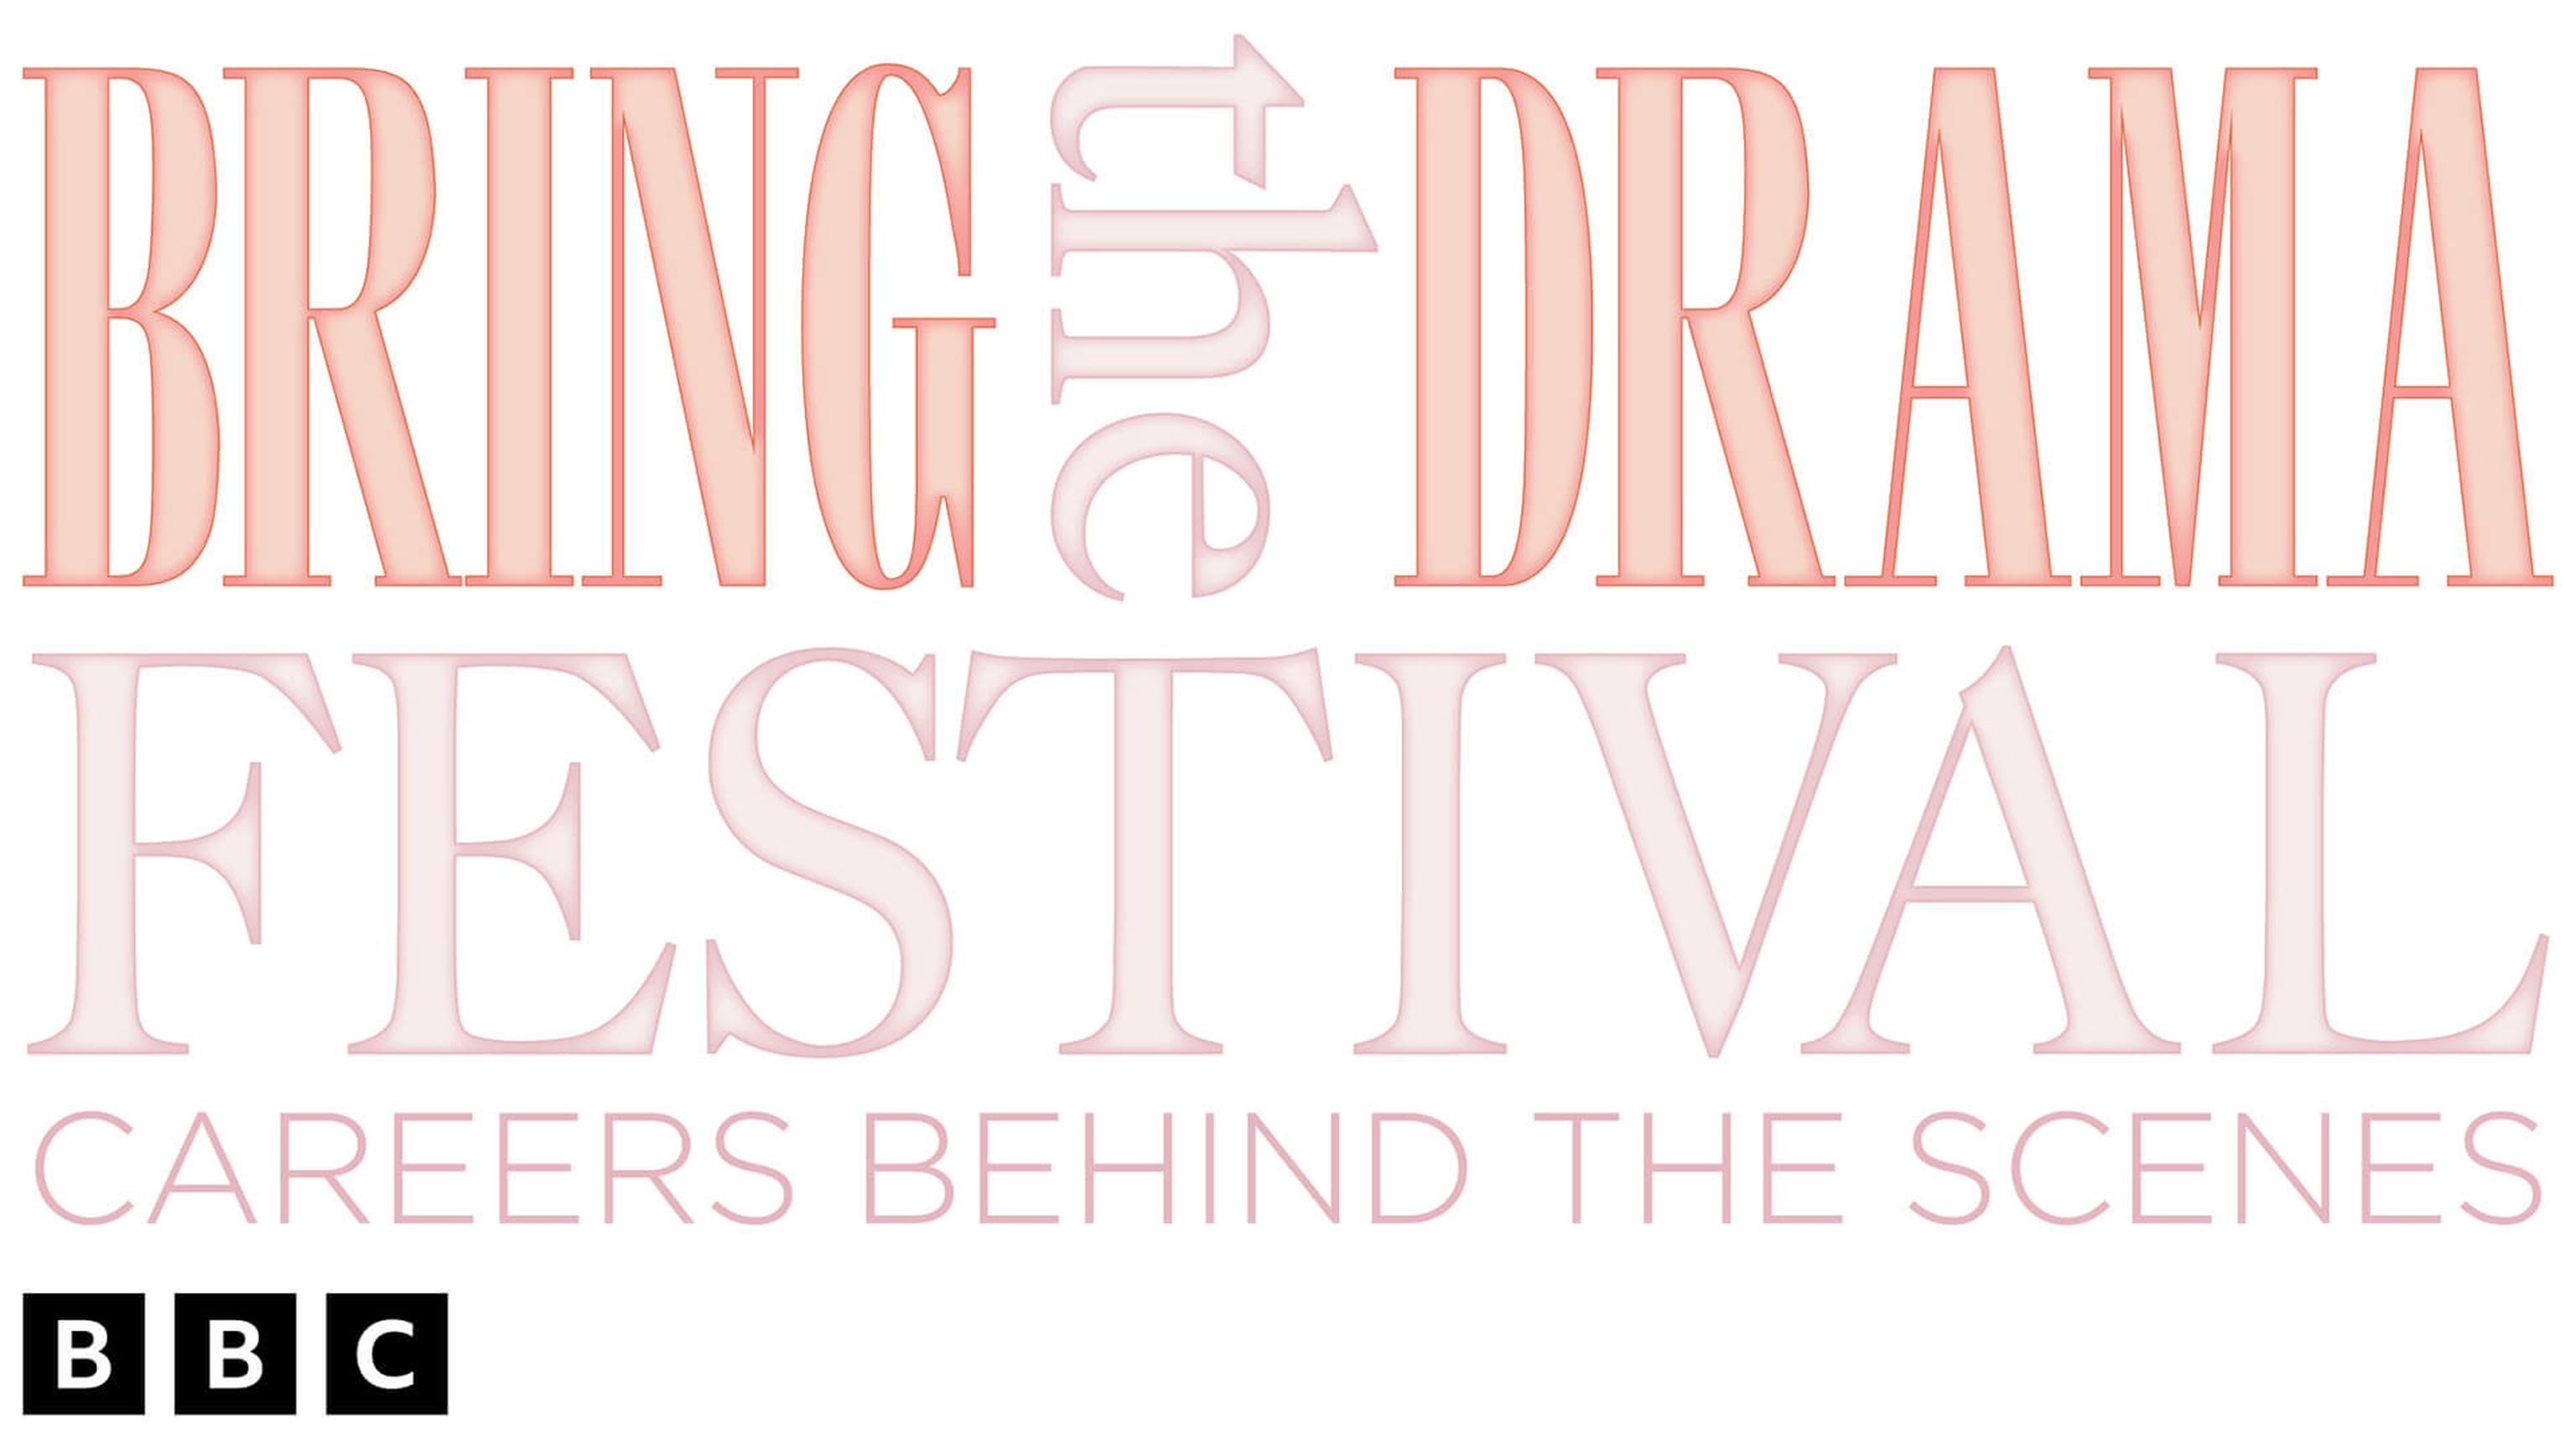 BBC Bing the drama festival - Careers behind the scenes